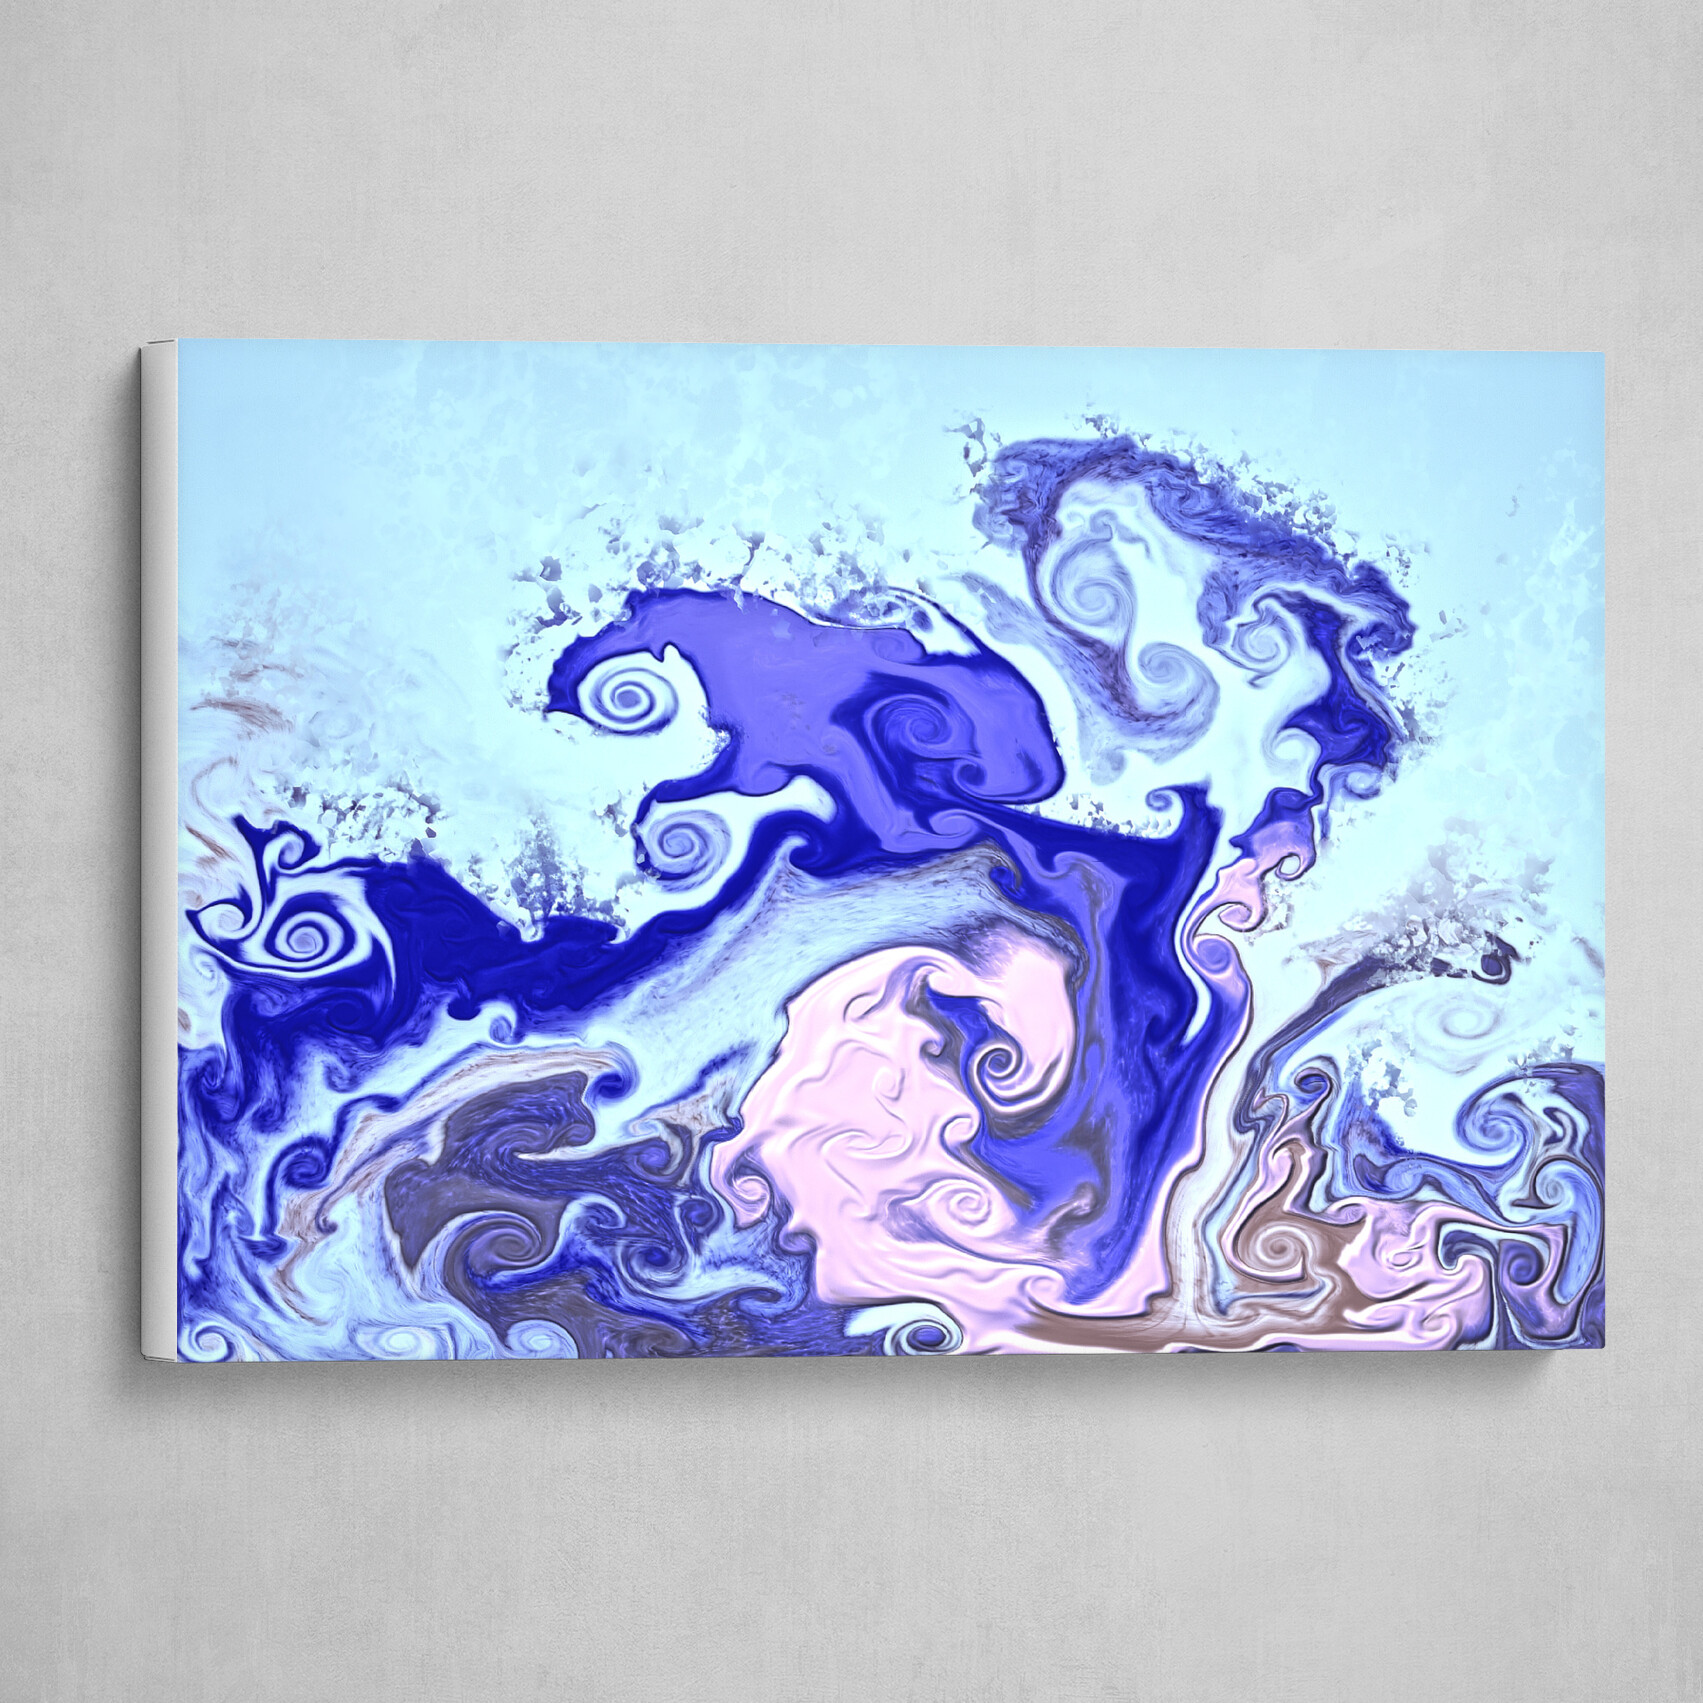 Purple and light blue fluid pour abstract art 1